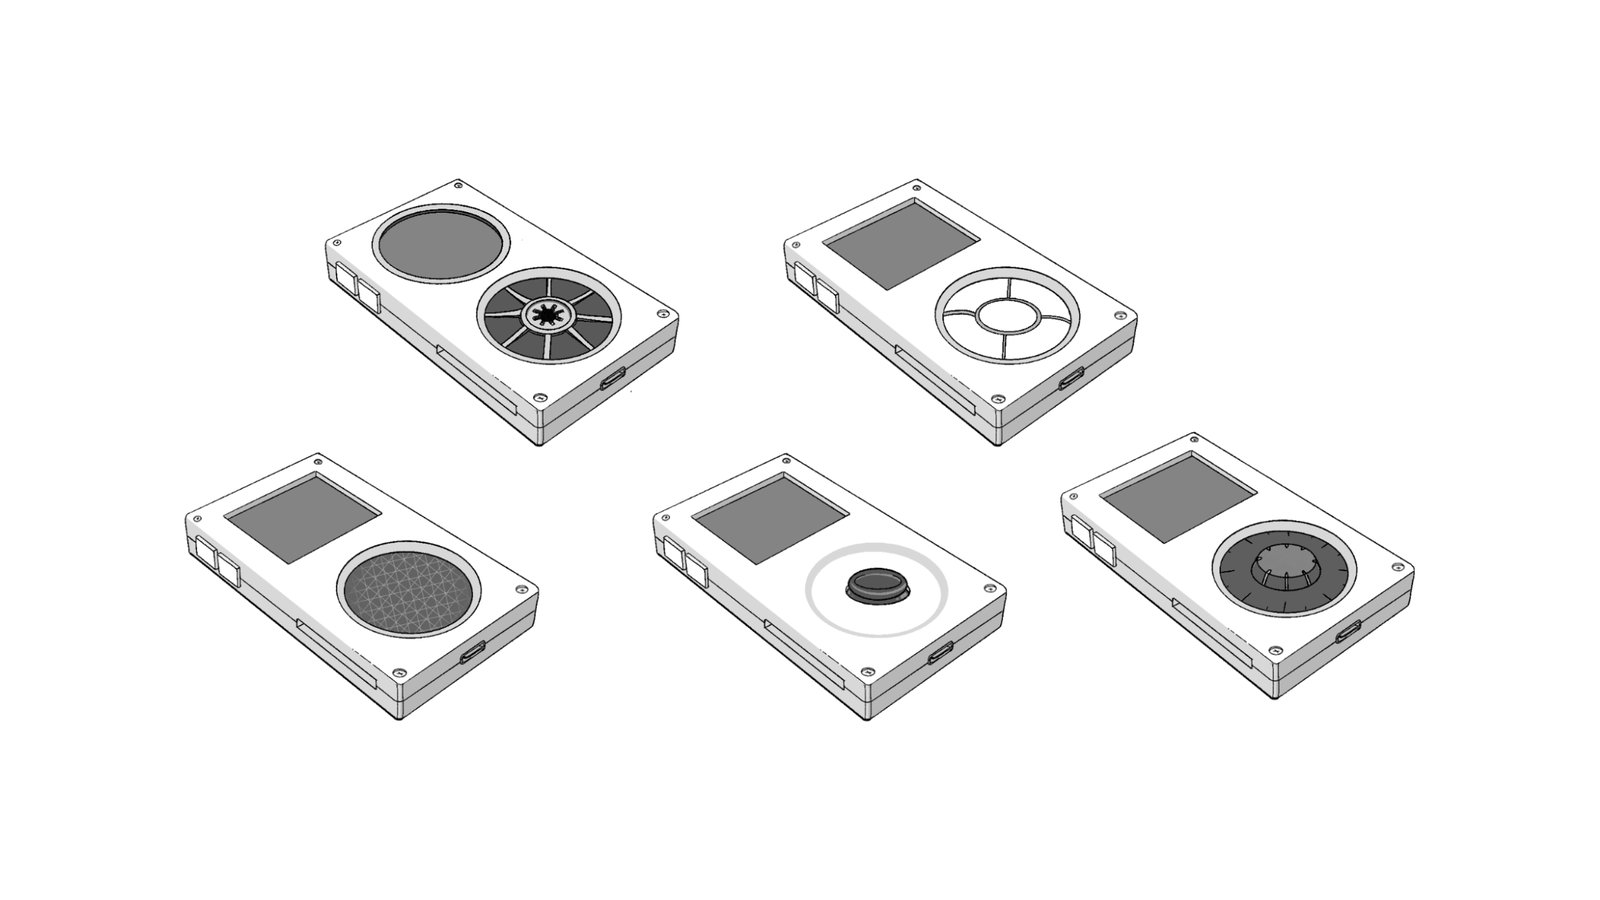 Five different concept sketches of various input hardware ideas. A cassette-inspired reel, directional buttons around a middle button, a circular trackpad, an analog joystick, and a rotary encoder